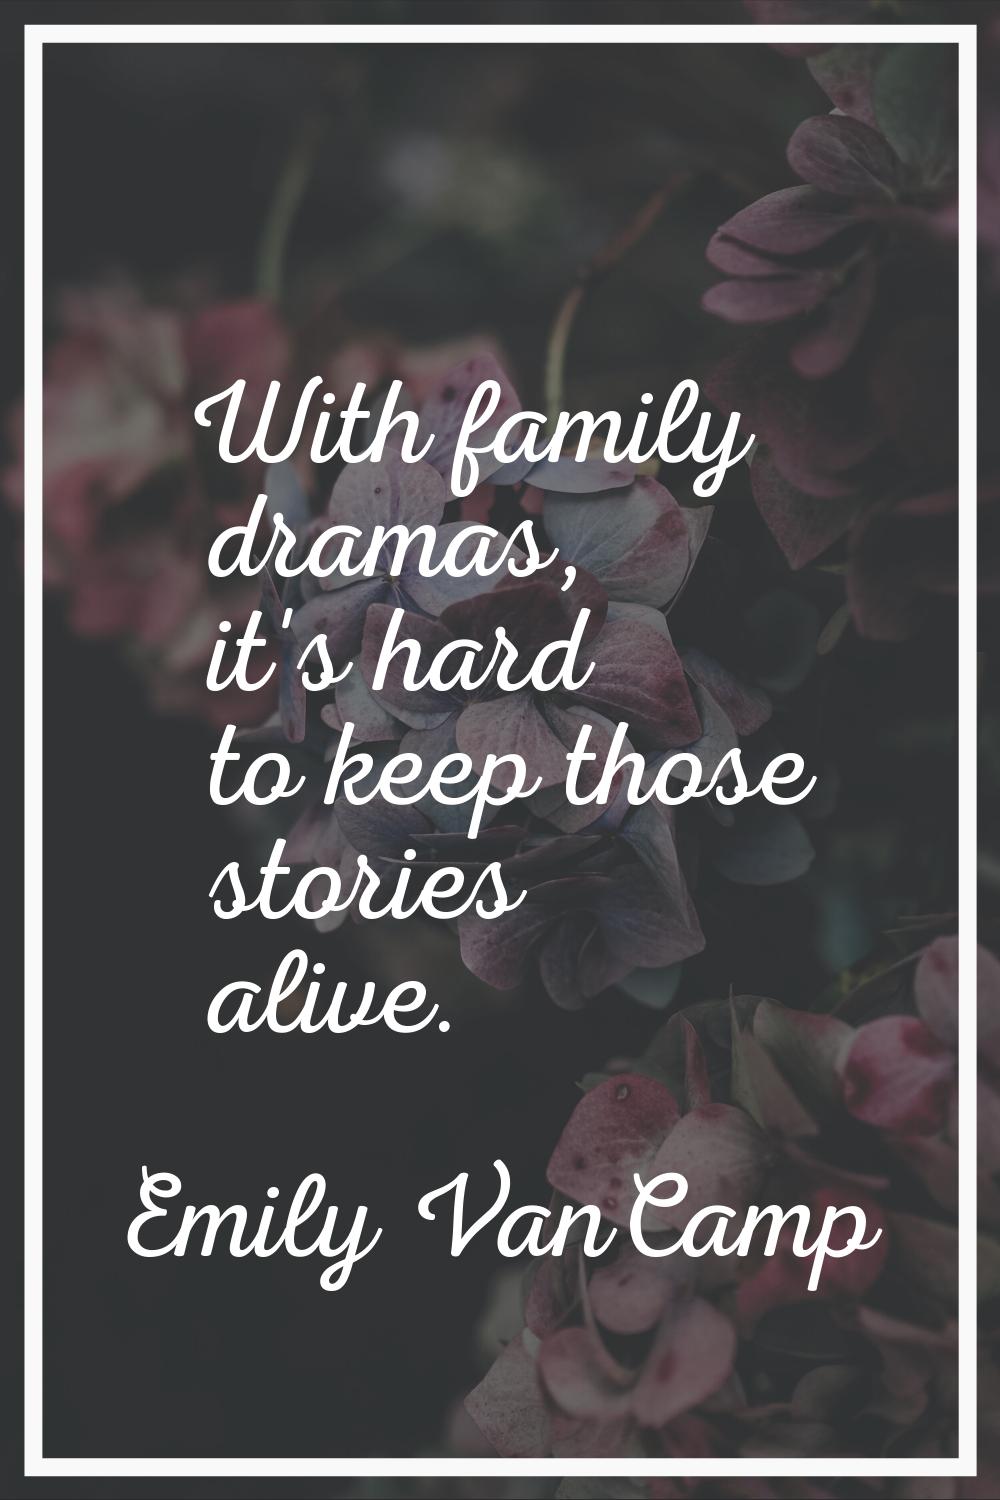 With family dramas, it's hard to keep those stories alive.